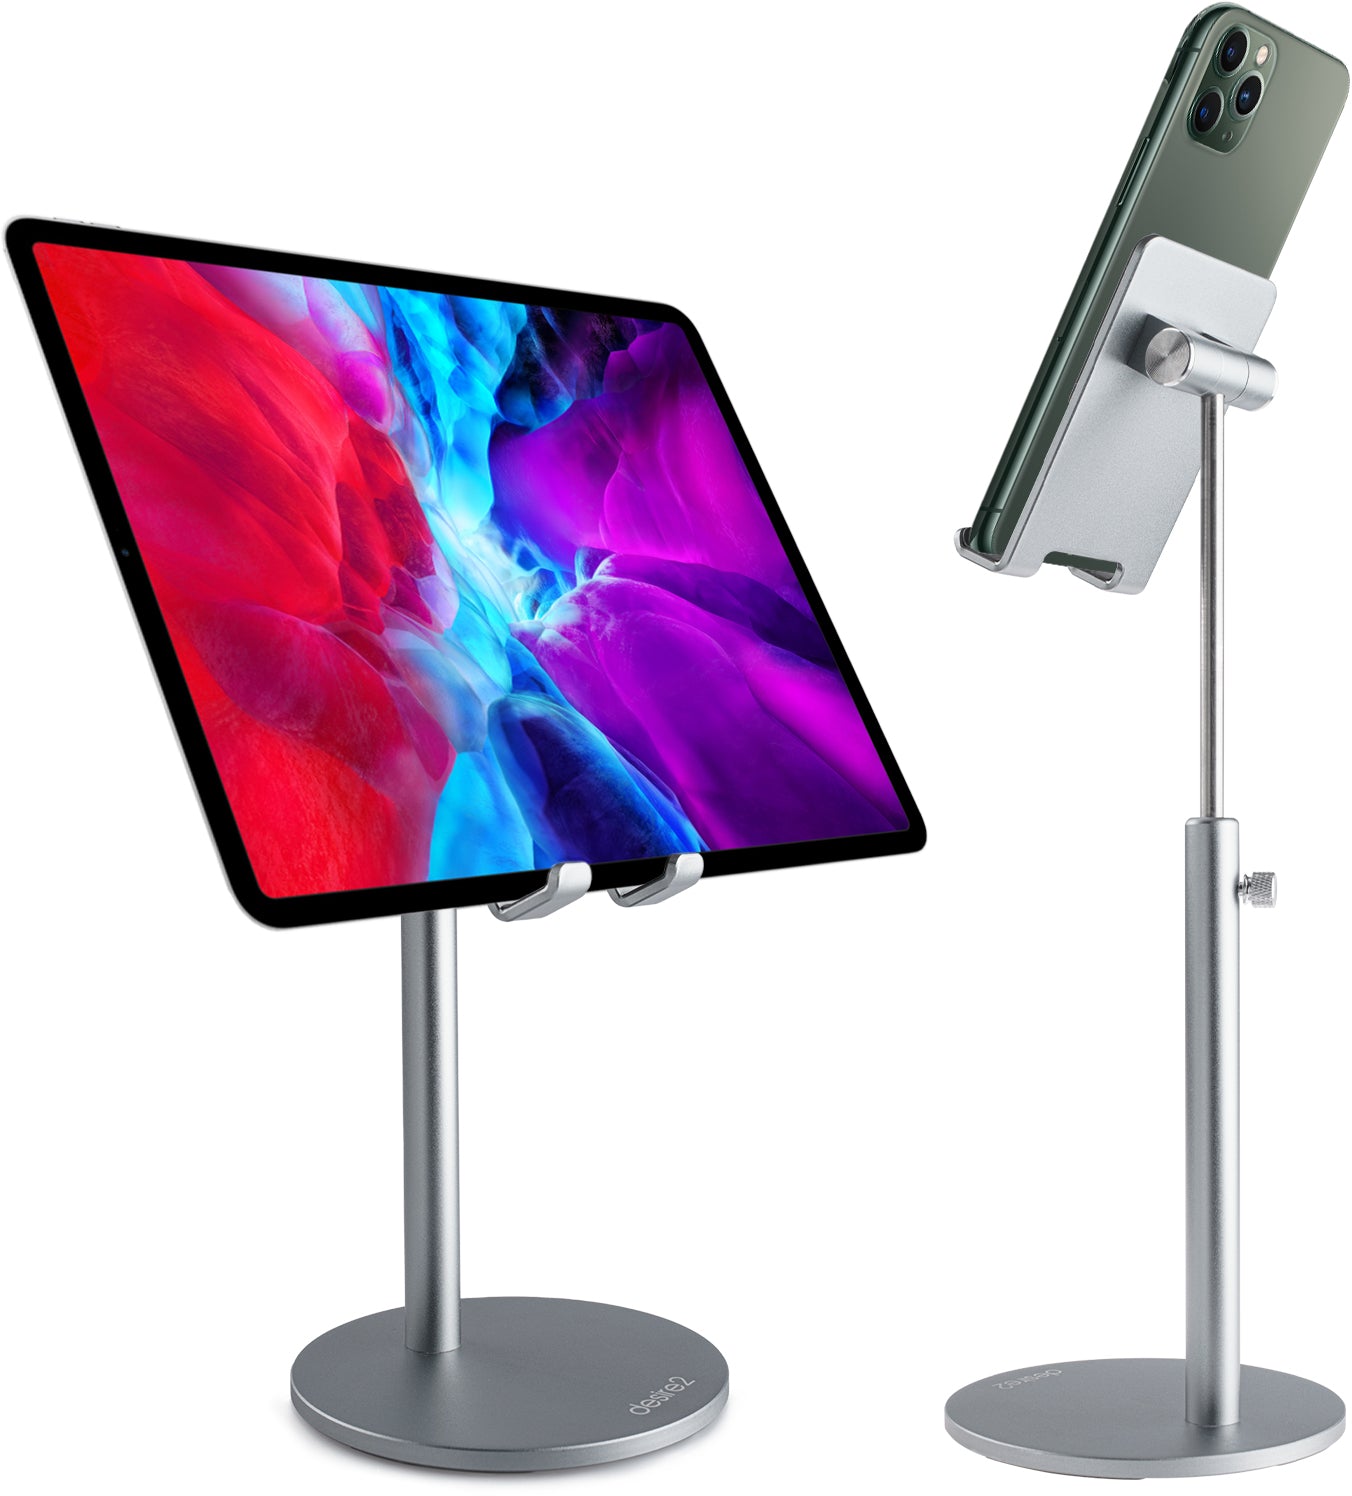 Adjustable height desk mounted phone and tablet stand made from solid metal.  Shown holding an apple ipad pro from the front and iphone from the rear 